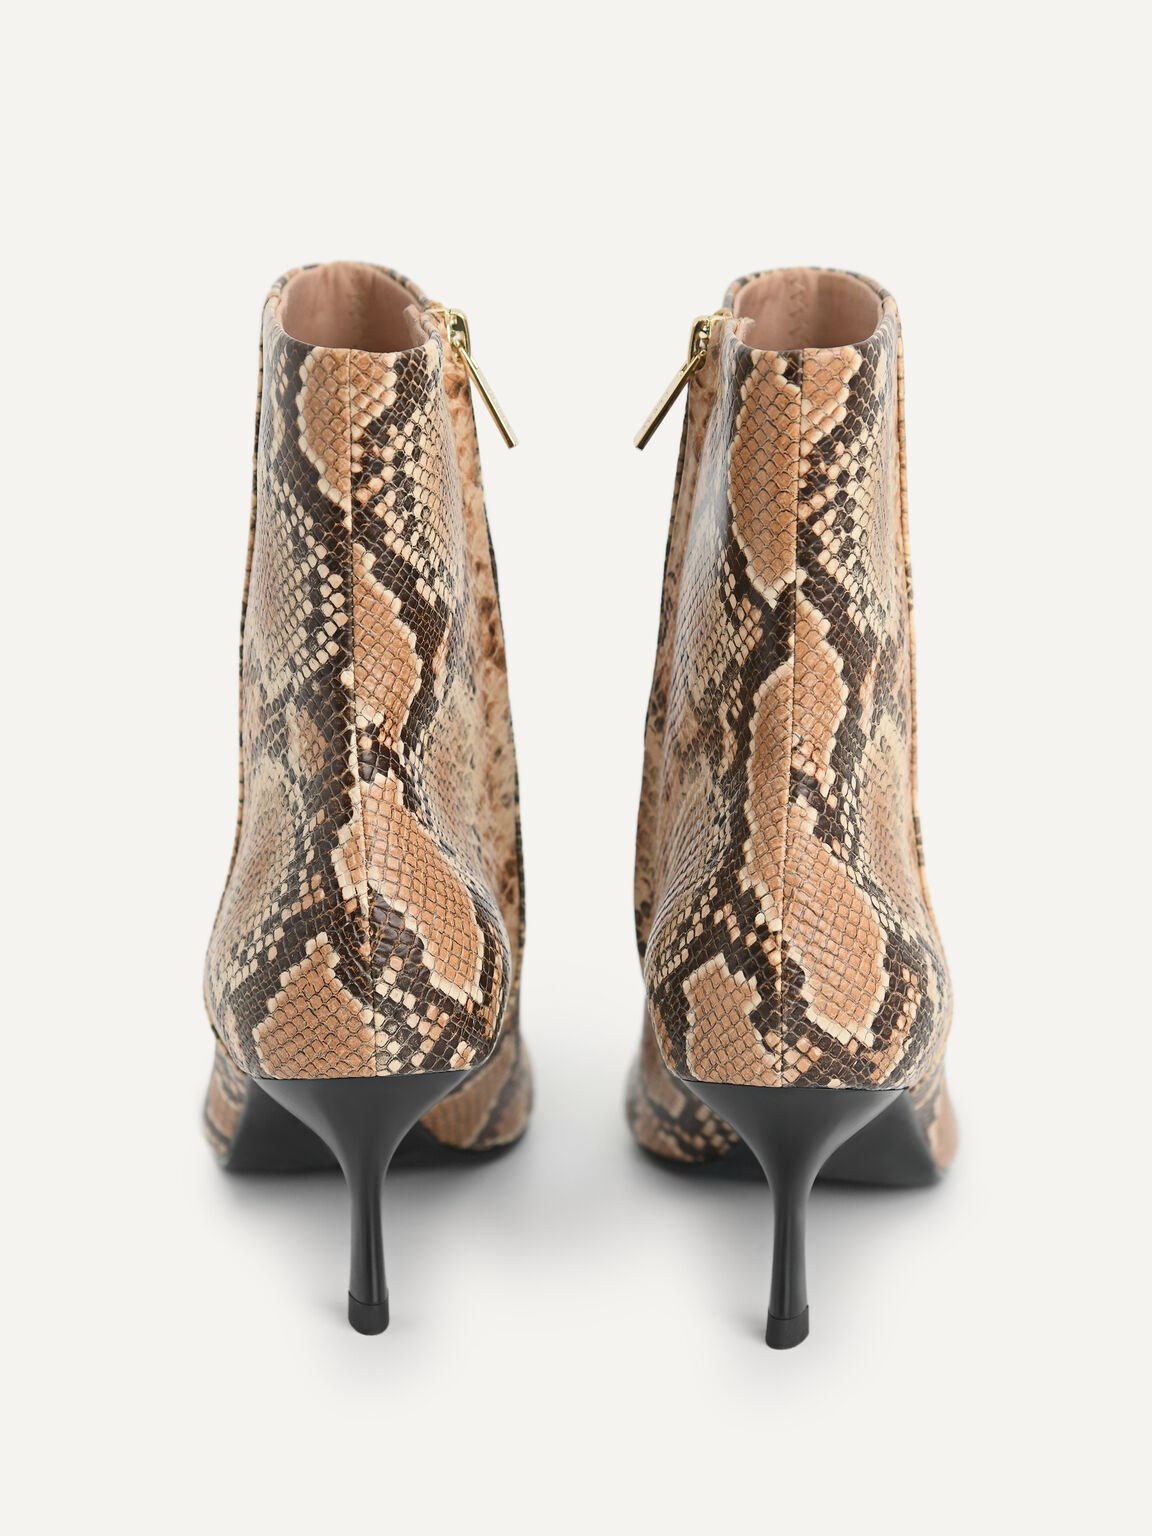 Snake-Effect Square-Toe Heel Ankle Boots, Multi